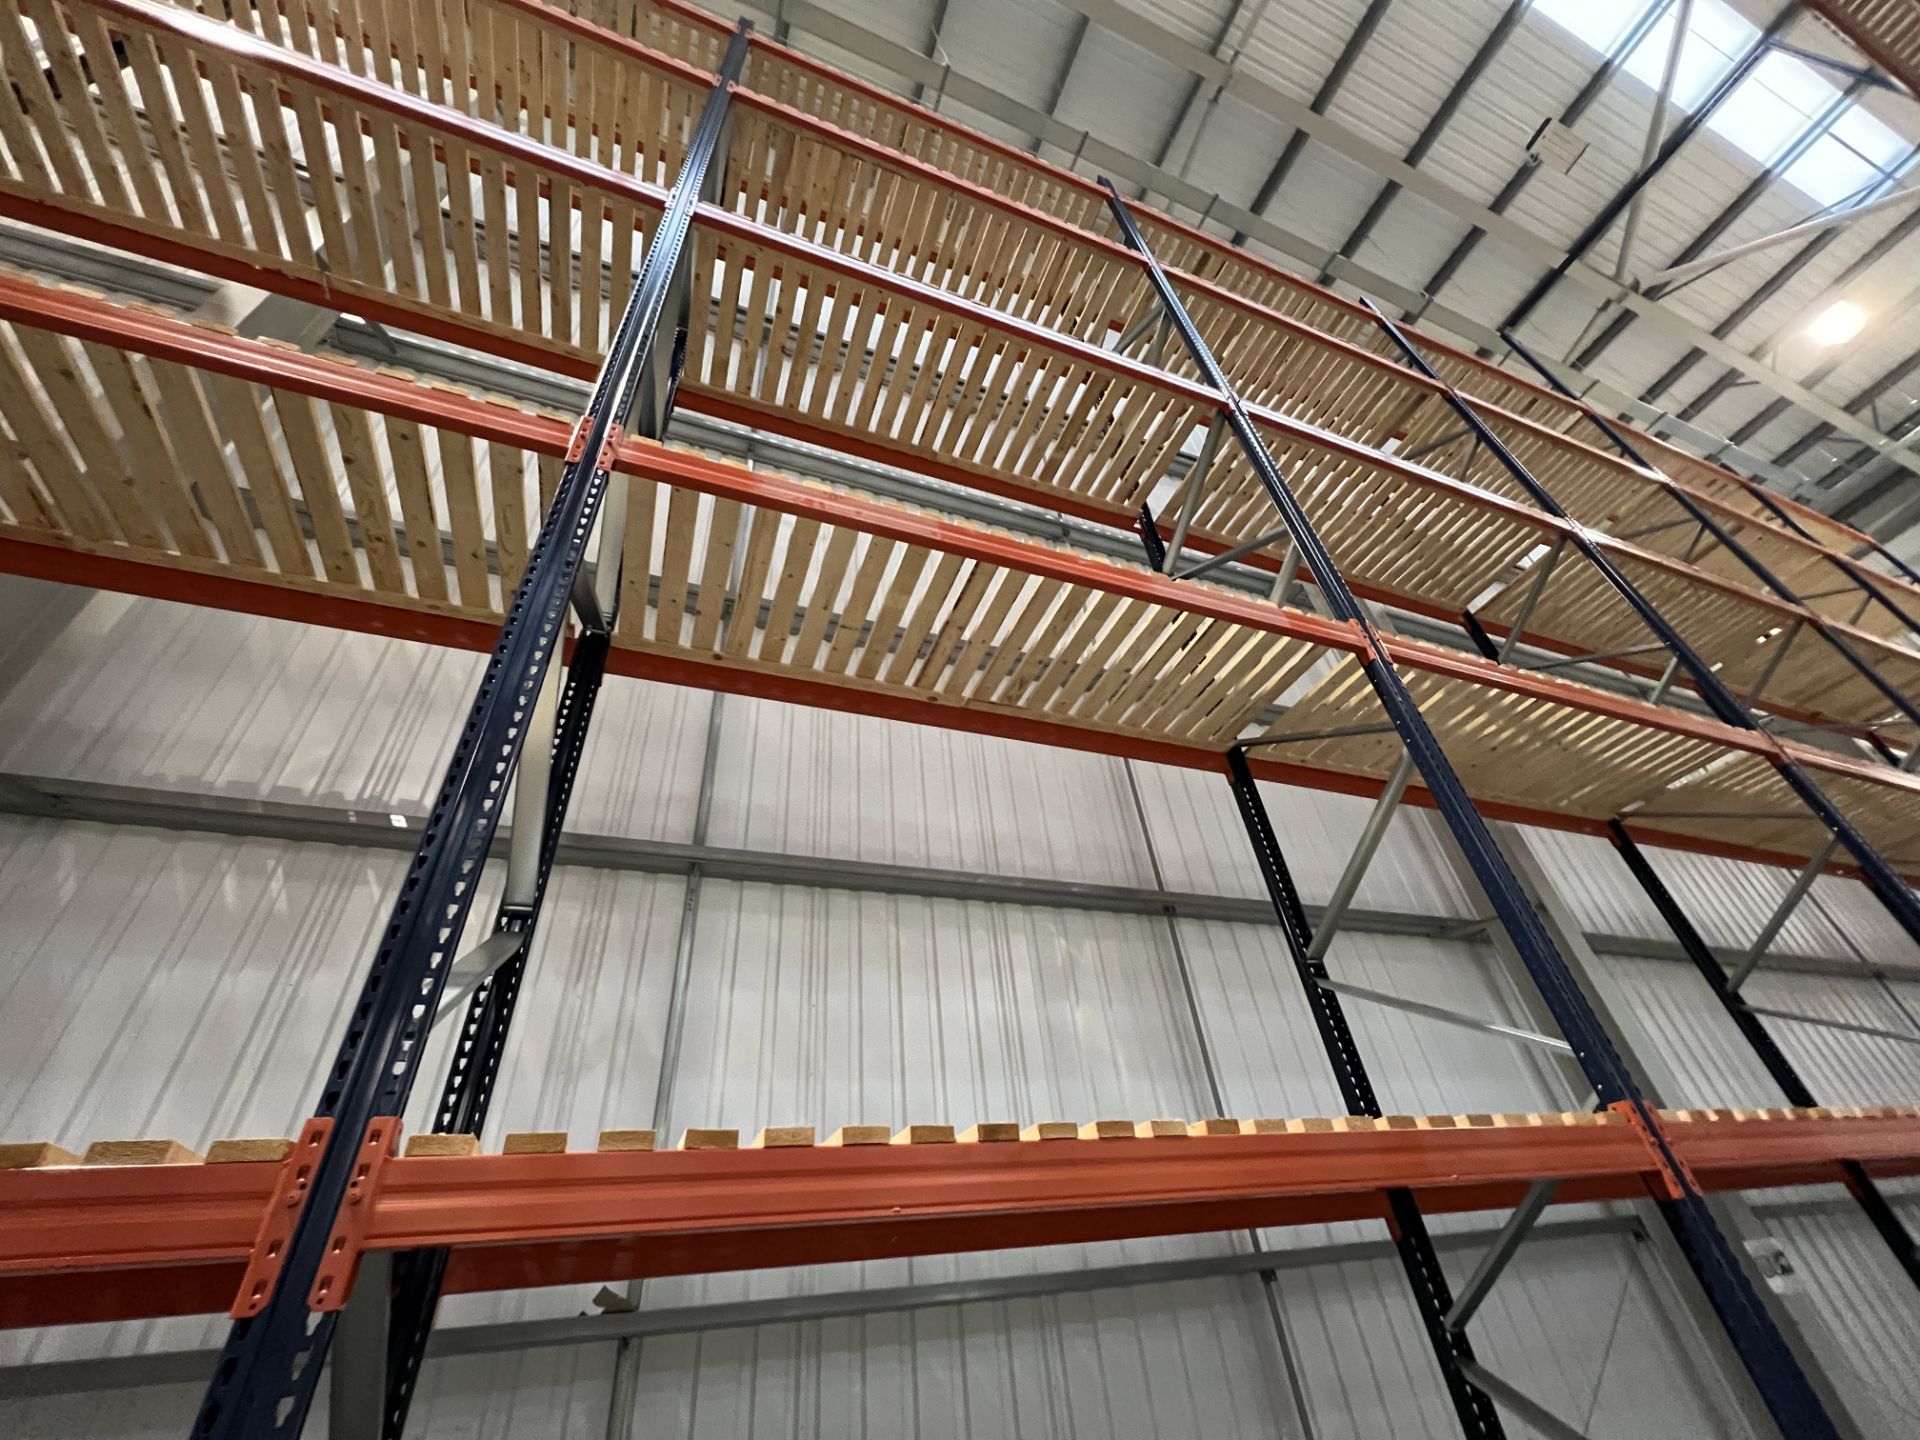 Mecalux M-22P high bay boltless pallet racking (2021), a 53 metre single run with 16 bays, to - Image 11 of 17